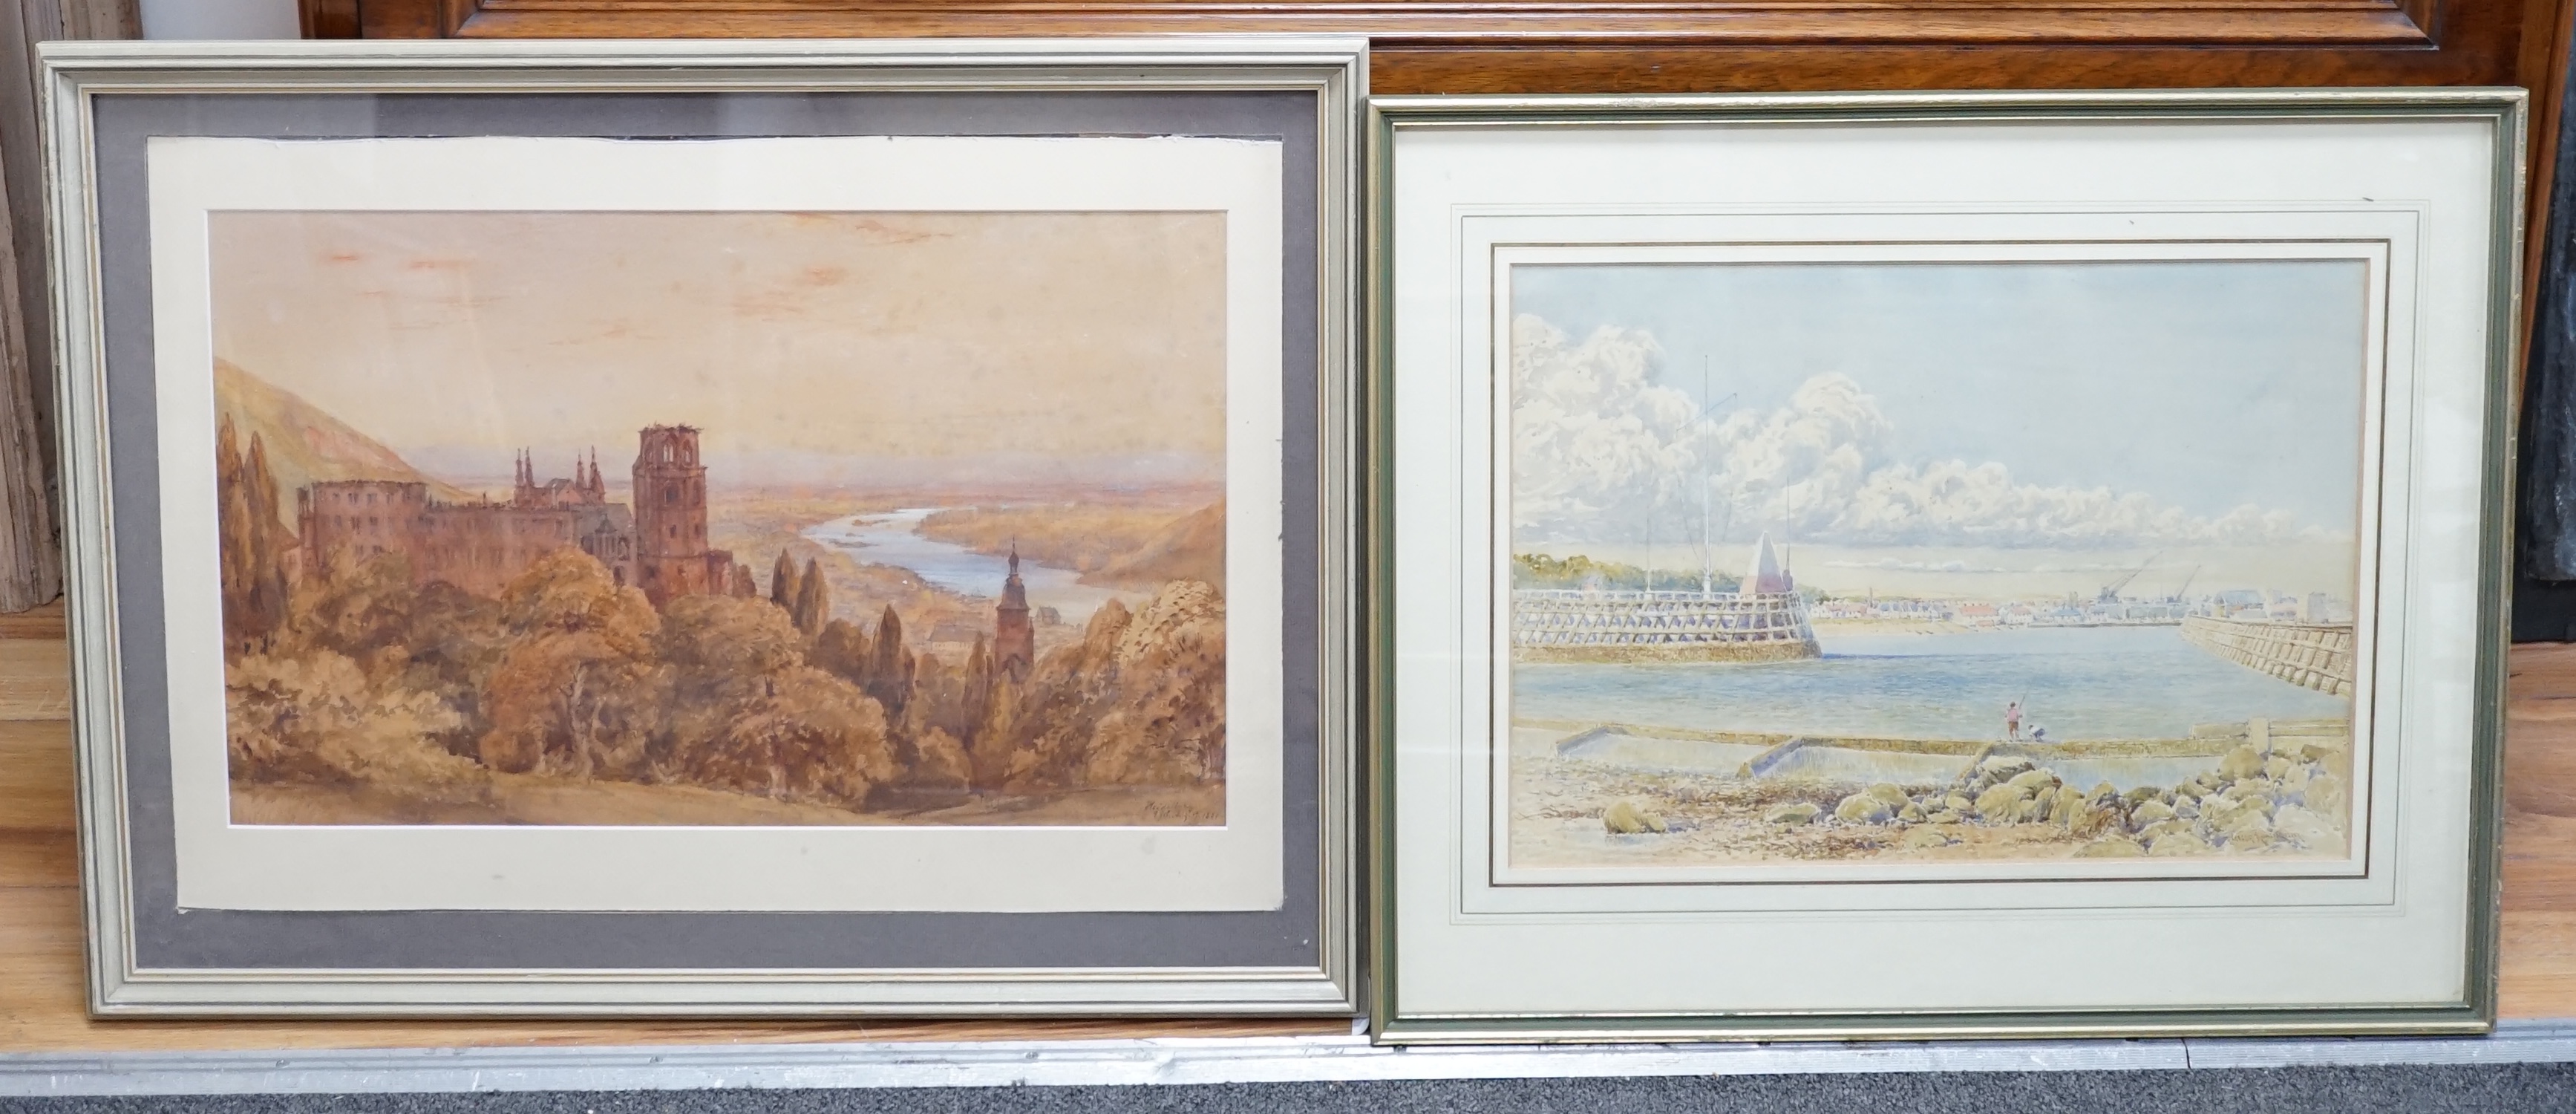 Two 19th century watercolours comprising: Thomas Leeson Rowbotham (1823-1875) and attributed to Eliza Turck (1832-1891), German landscape and Shoreham-by-Sea, each signed, largest 27 x 45cm. Condition - poor to fair